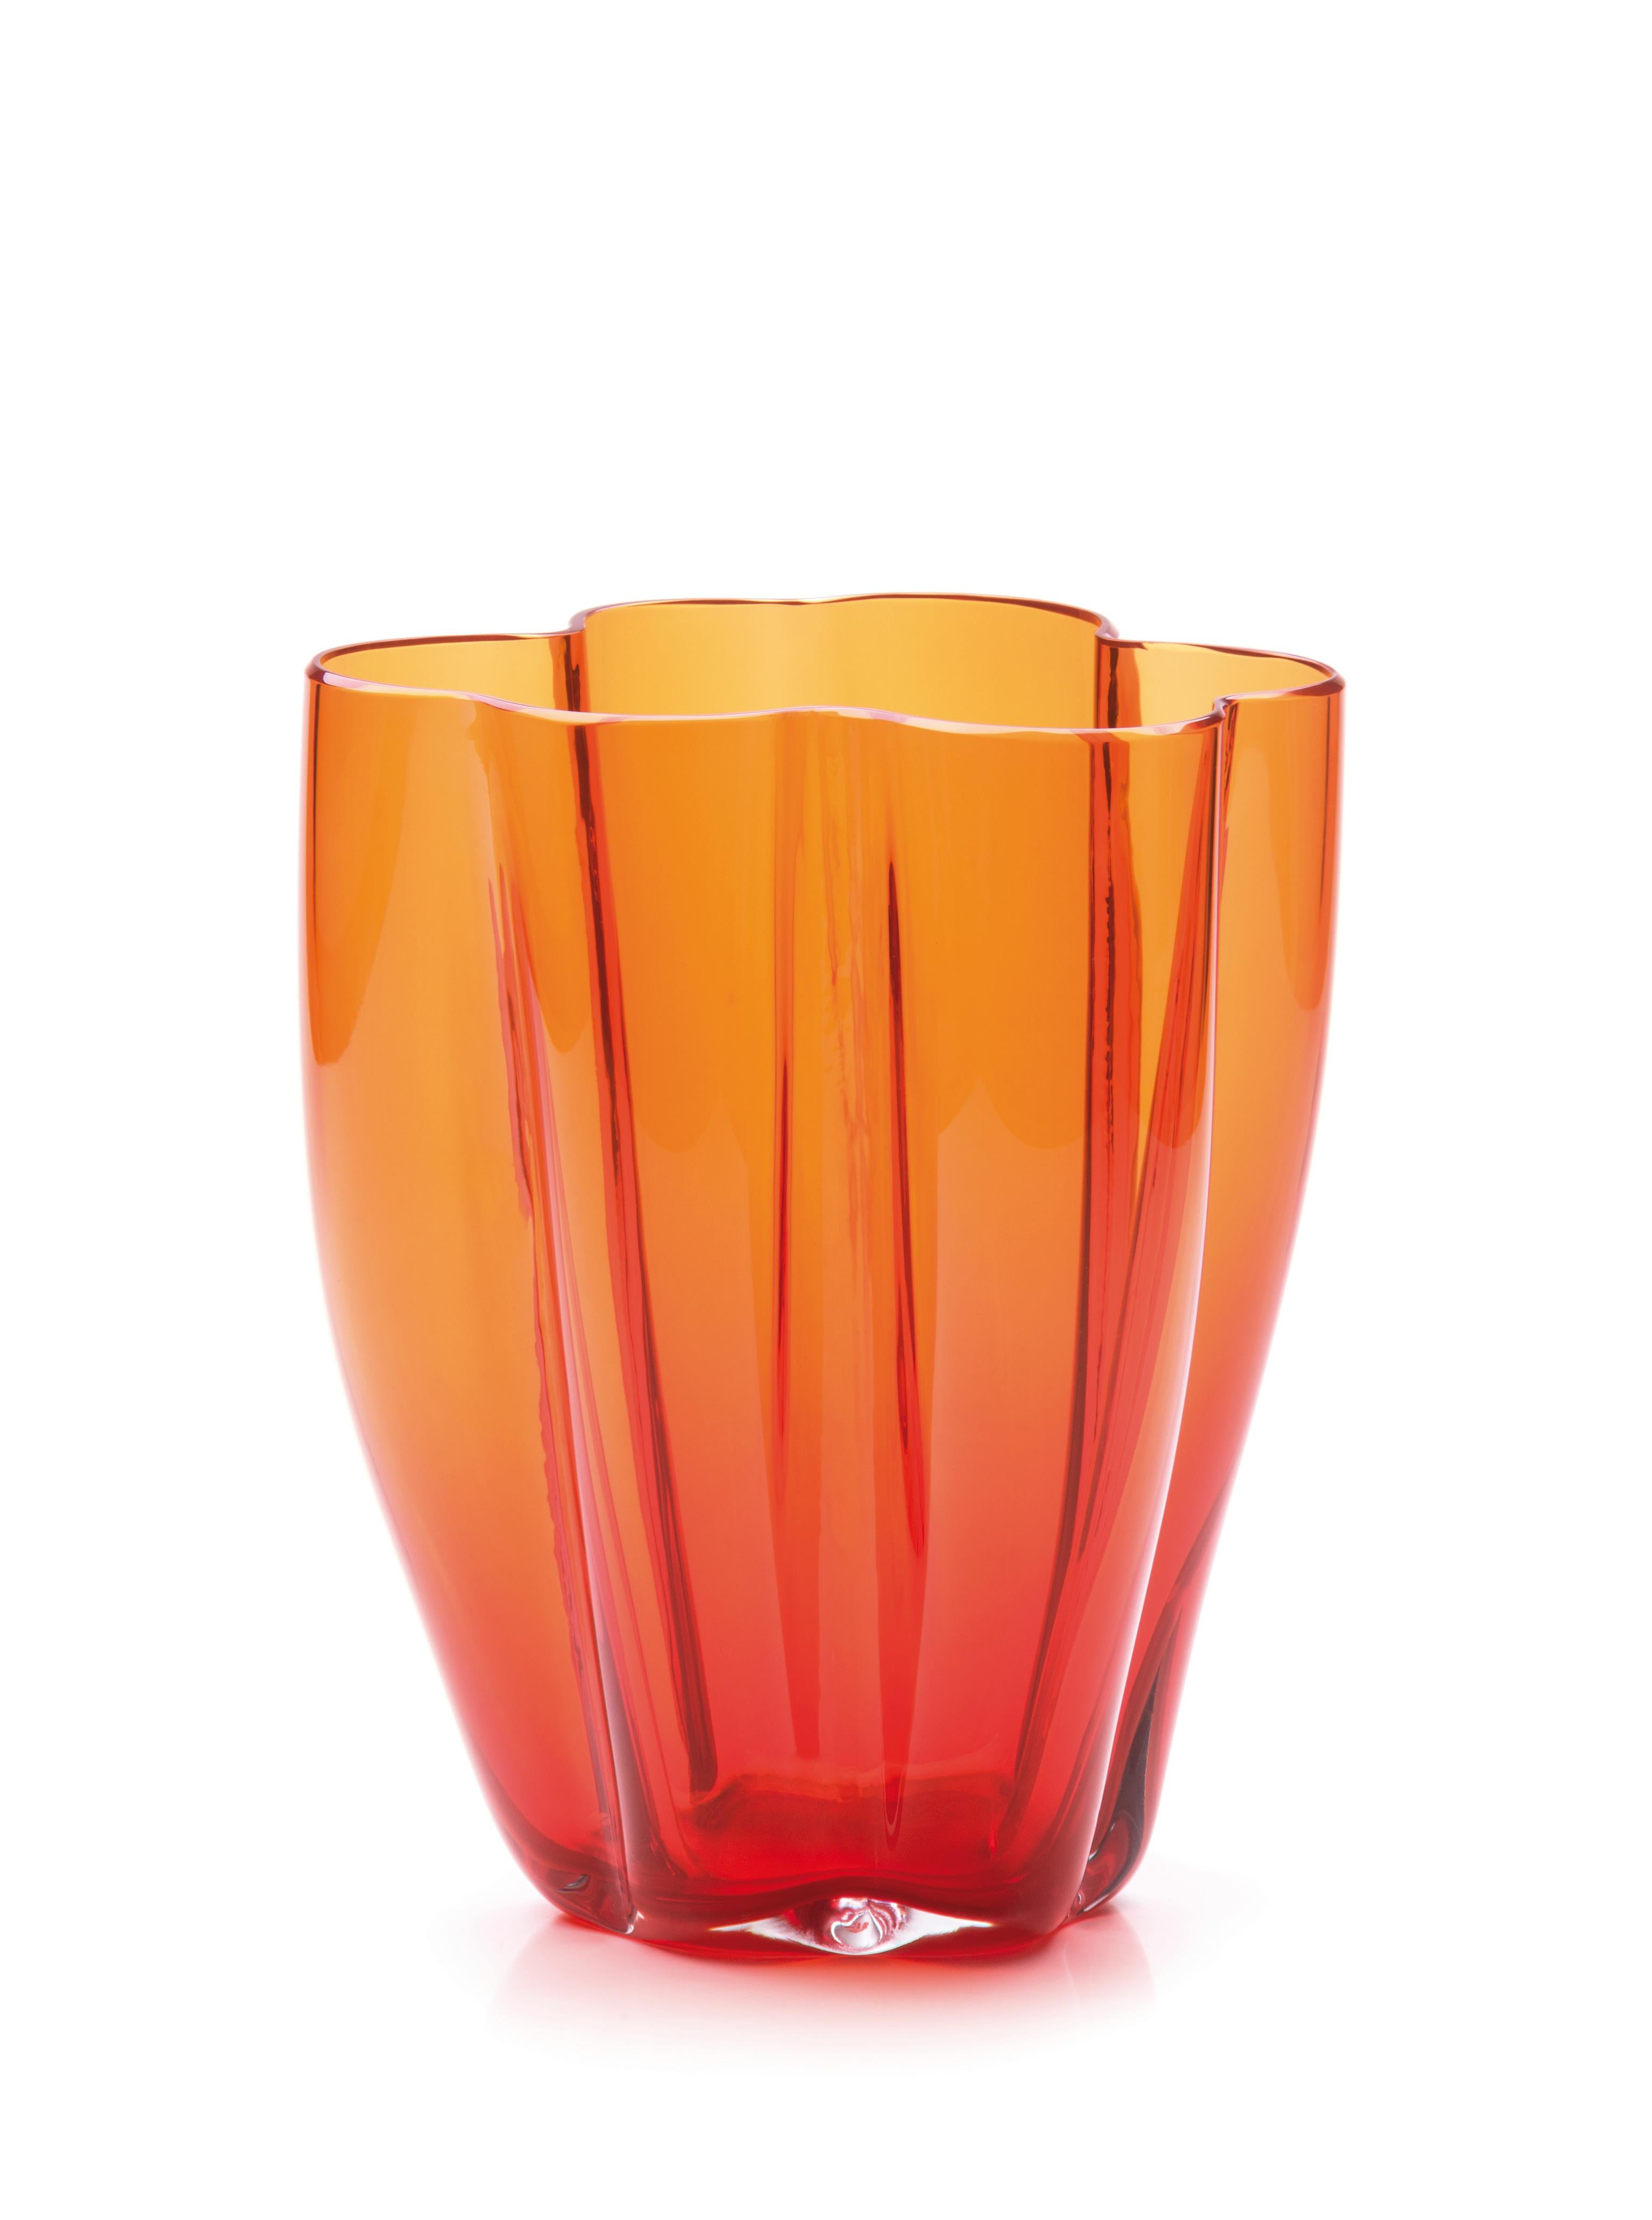 Petalo Orange large vase by Purho
Dimensions: D20 x H40 cm
Materials: Glass
Other colours and Dimensions are available.

Purho is a new protagonist of made in Italy design , a work of synthesis, a research that has lasted for years, an Italian